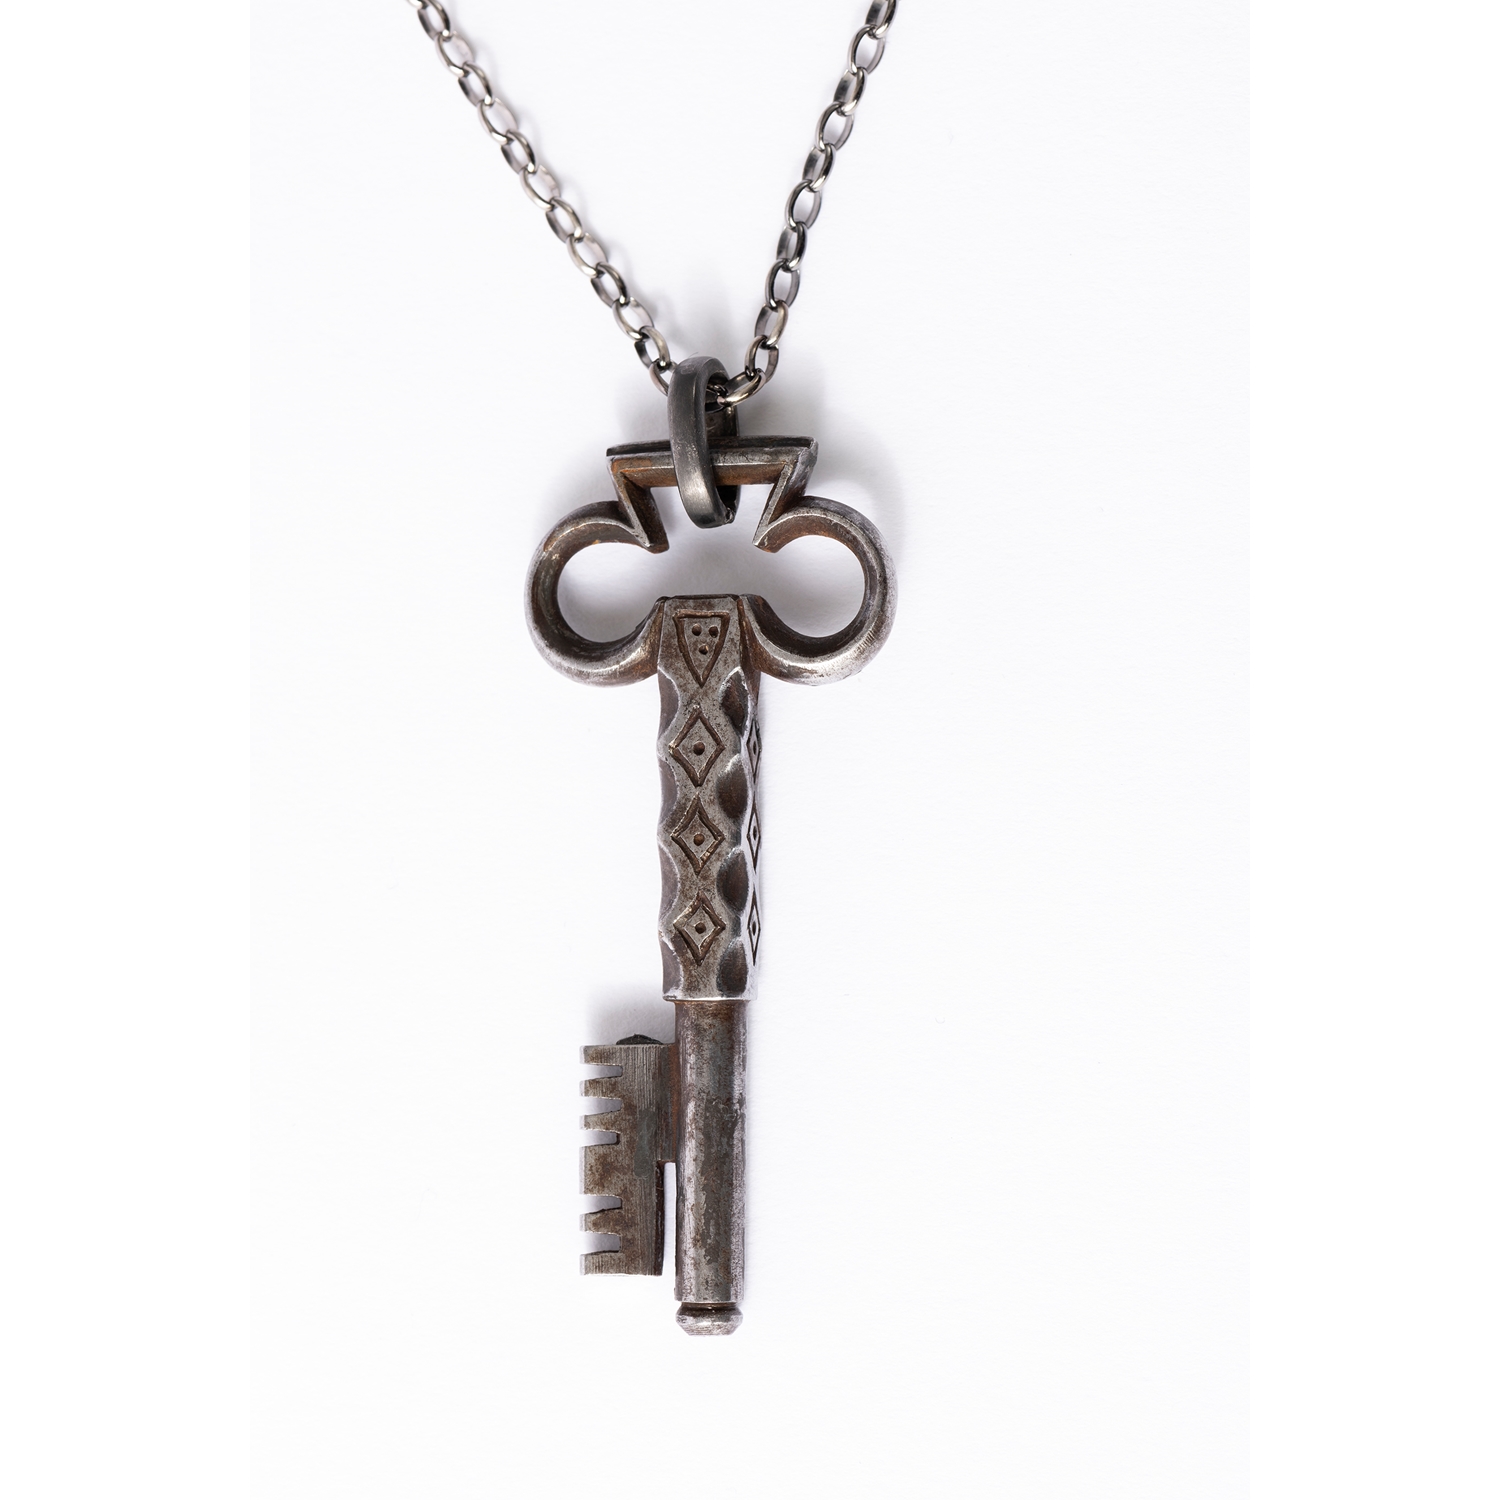 UNIQUE PENDANT WITH A VERY RARE FRENCH MEDIEVAL KEY FROM THE FORMER BRICARD MUSEUM - SOLD 